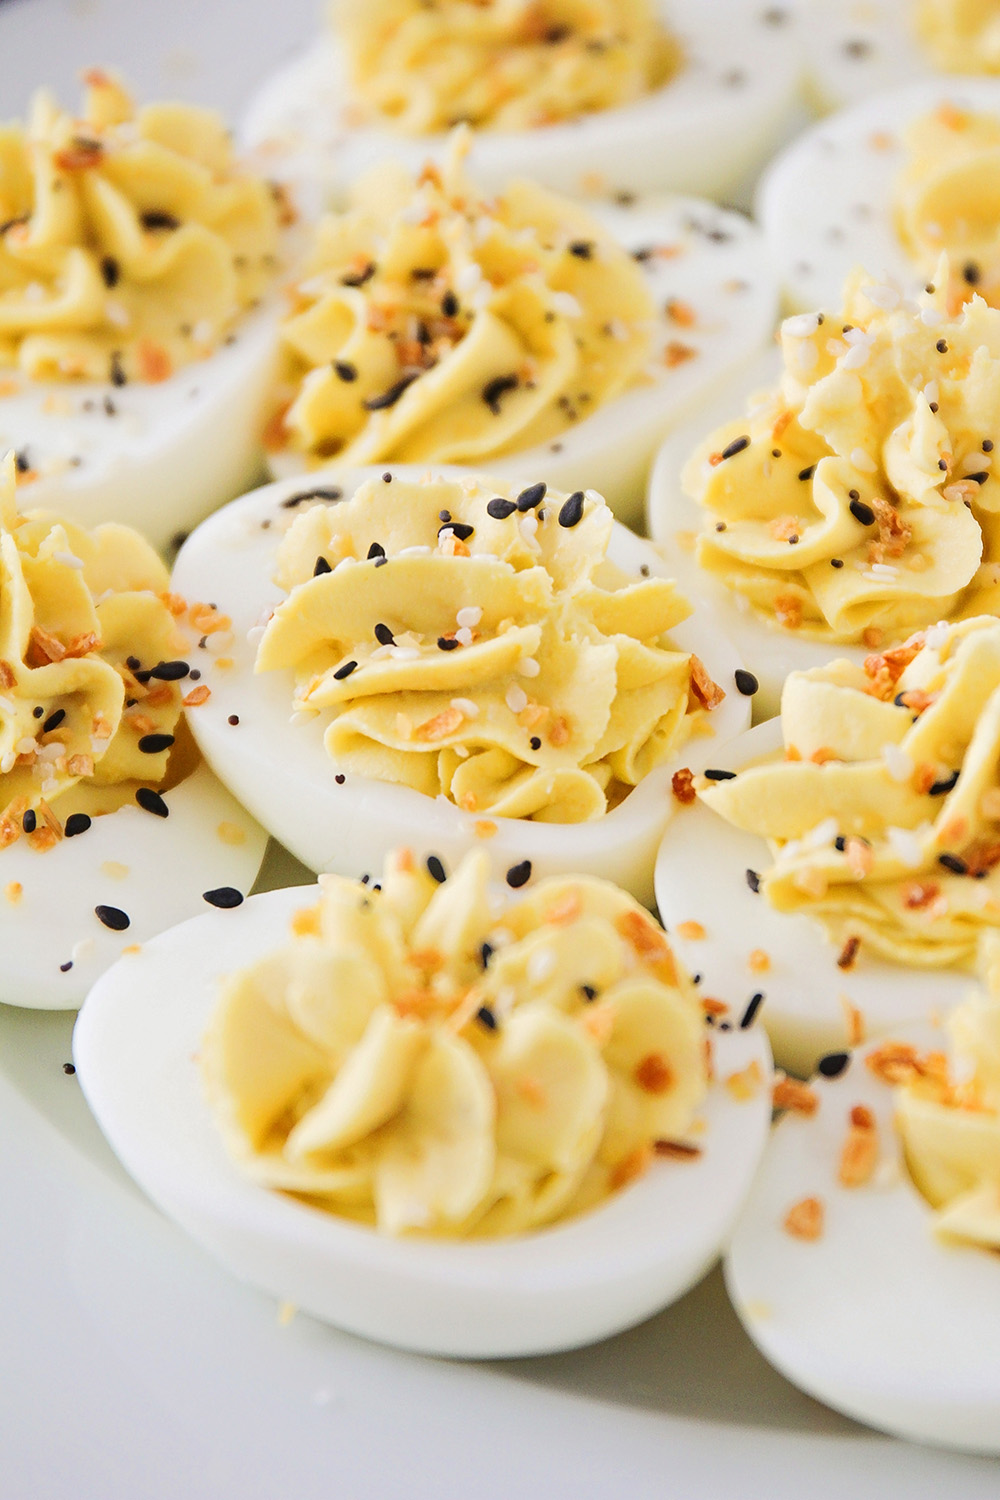 These everything deviled eggs are just as delicious as classic deviled eggs, but with a fun pop of flavor from everything bagel seasoning!